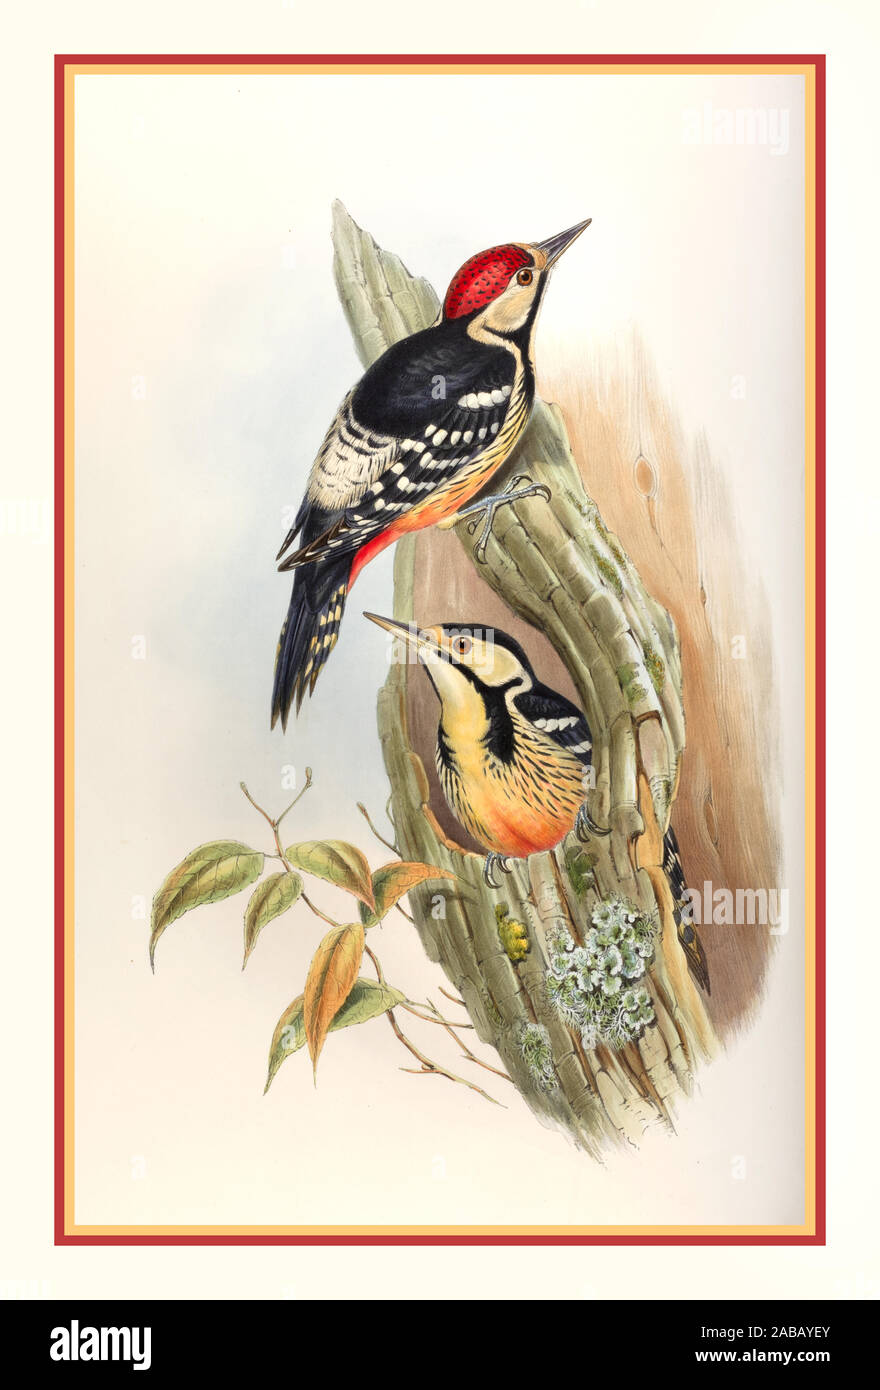 Vintage 1860’s lithograph WOODPECKER Picus insularis, Formosan Spotted Woodpecker Asia Rare Illustration  John Gould, (British painter, ornithologist, 1804-1881) illustrations Birds --Pictorial art works Colophon: Taylor and Francis. Completed by R. Bowdler Sharpe. Each plate accompanied by leaf with descriptive letterpress John Gould. The birds of Asia. London : Printed by Taylor and Francis : Published by the artist author, 1850-1883. Stock Photo